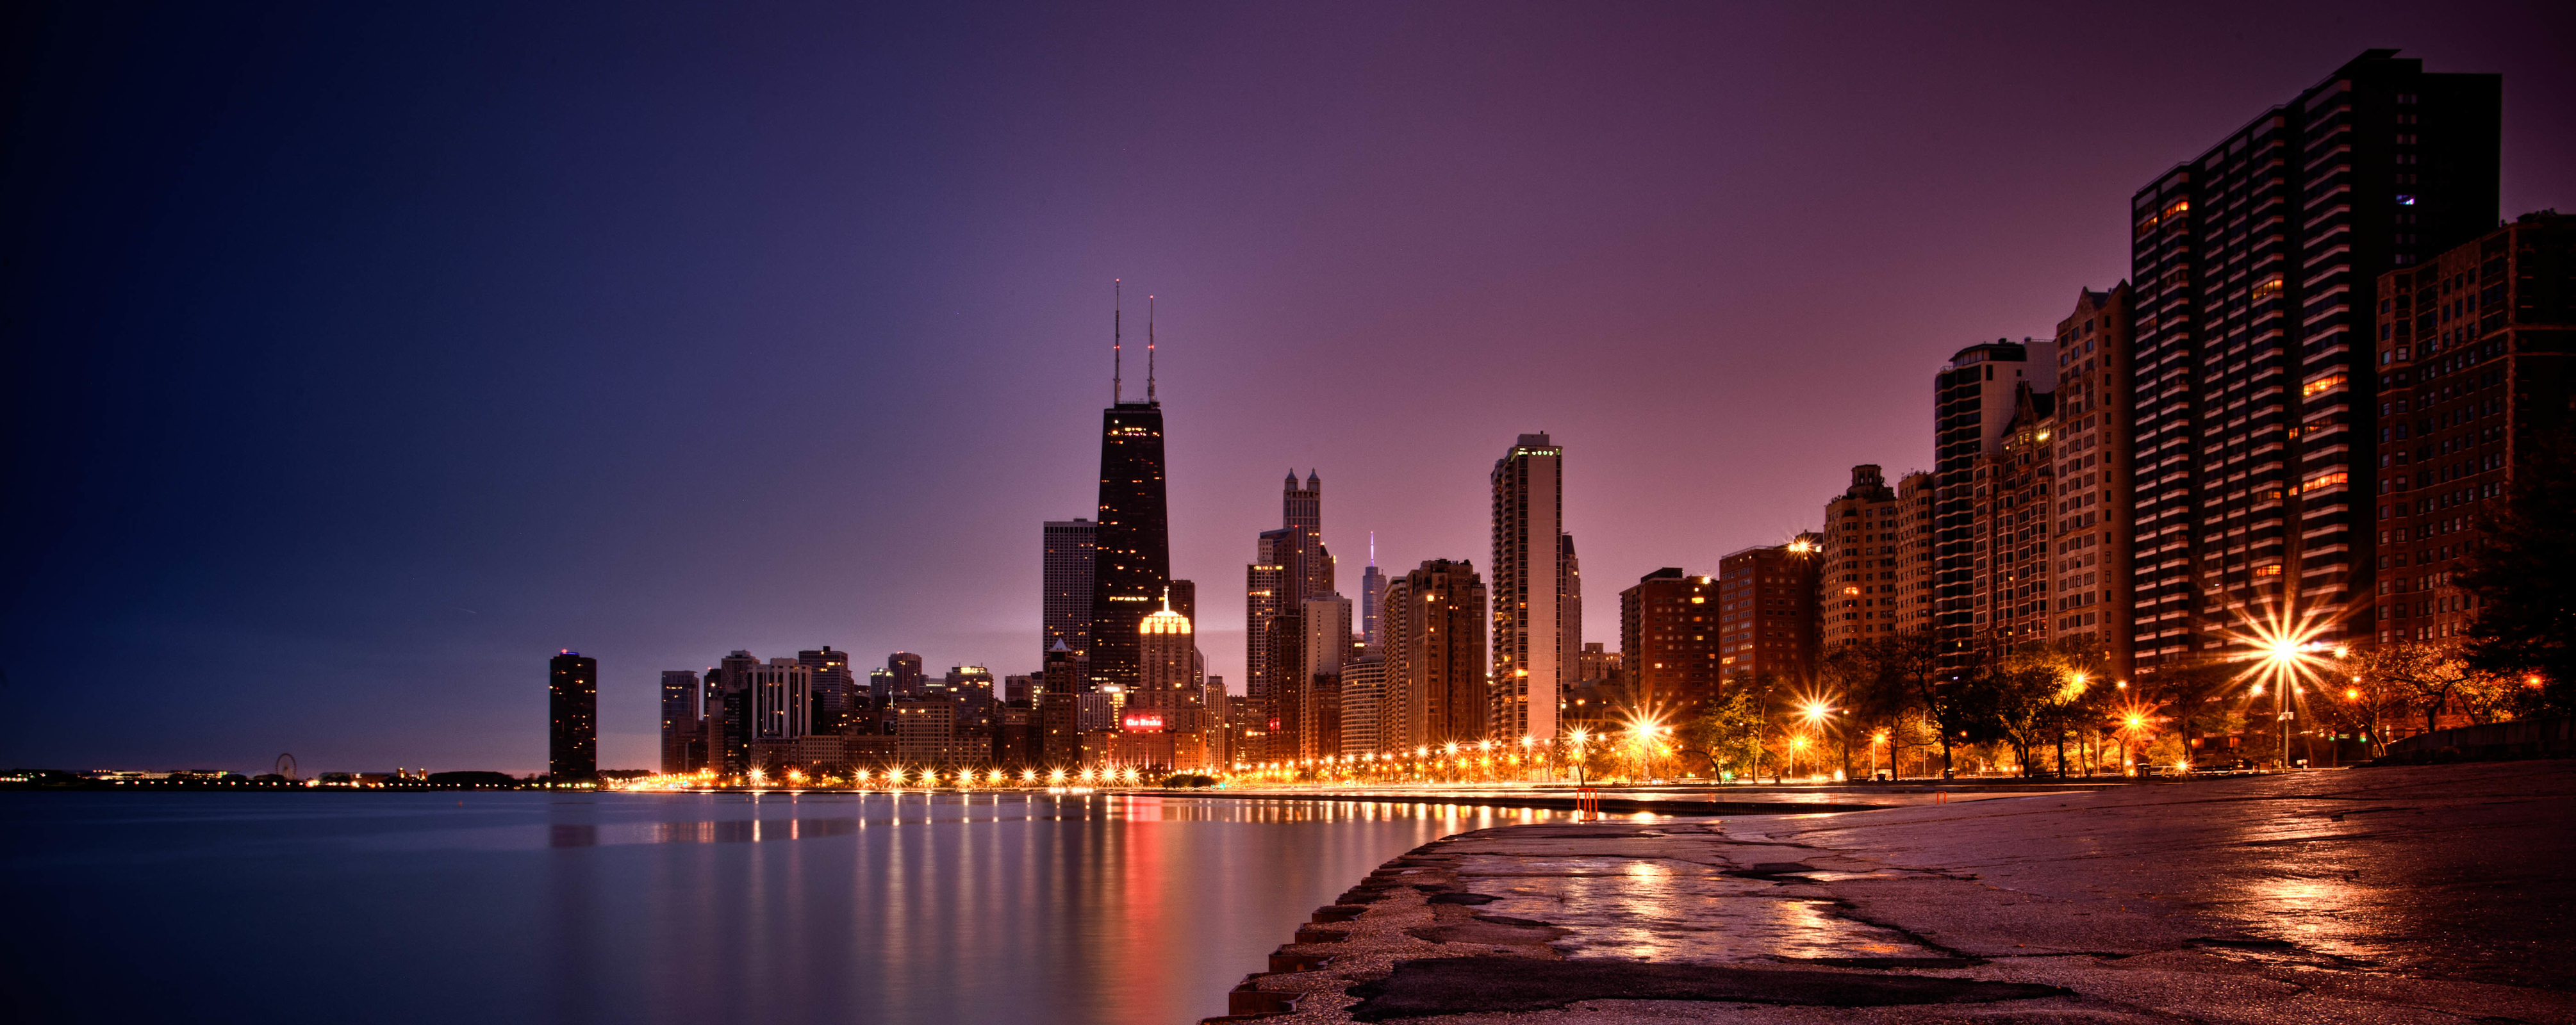 Chicago Illinois City River Skyscrapers Night Lights Wallpaper Gallery